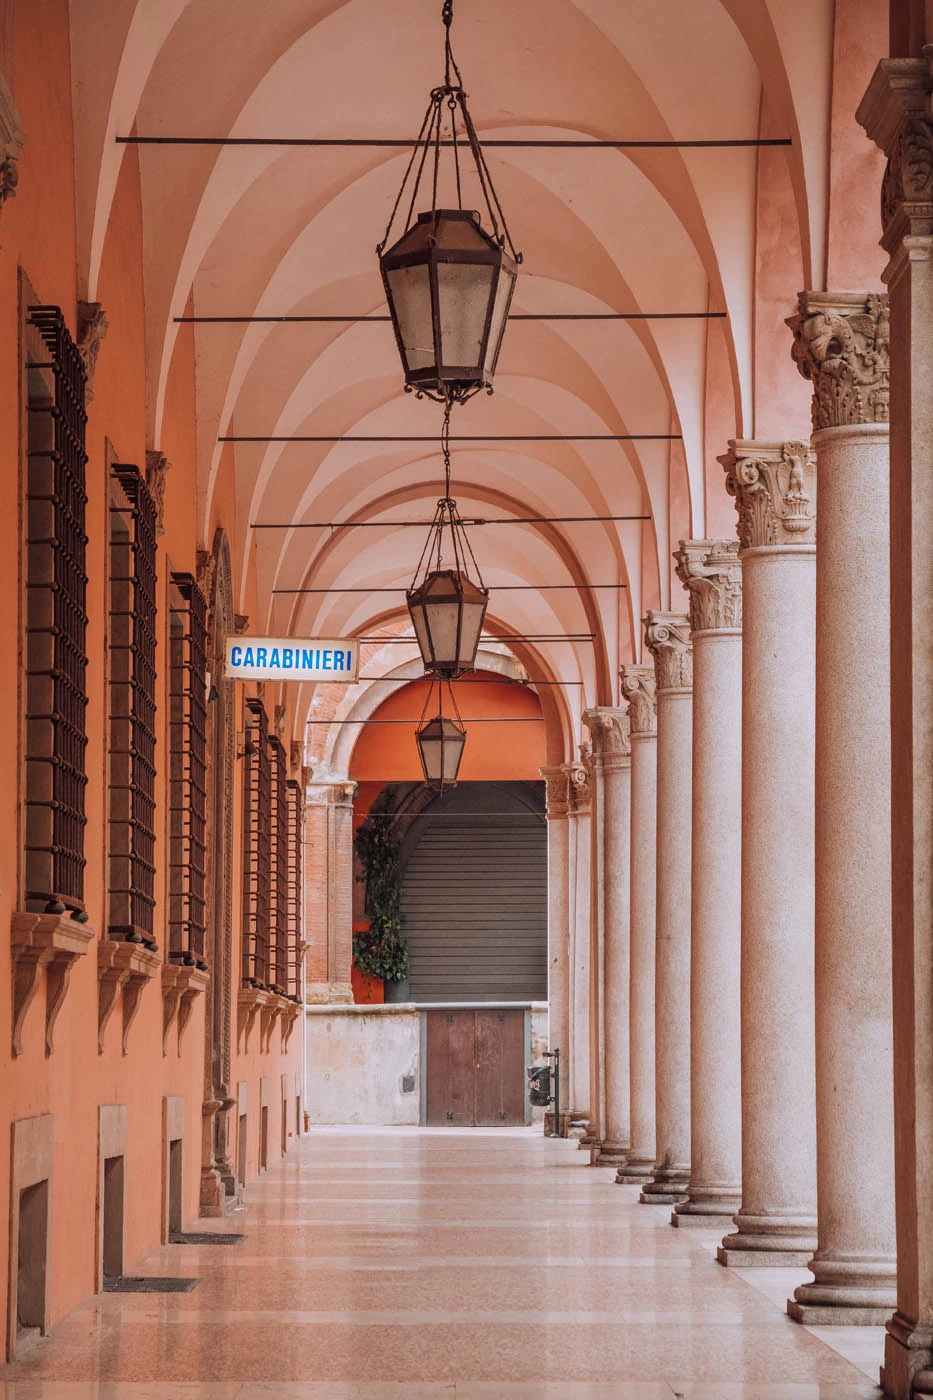 Things to Do in Bologna - Portico in front of Carabinieri office